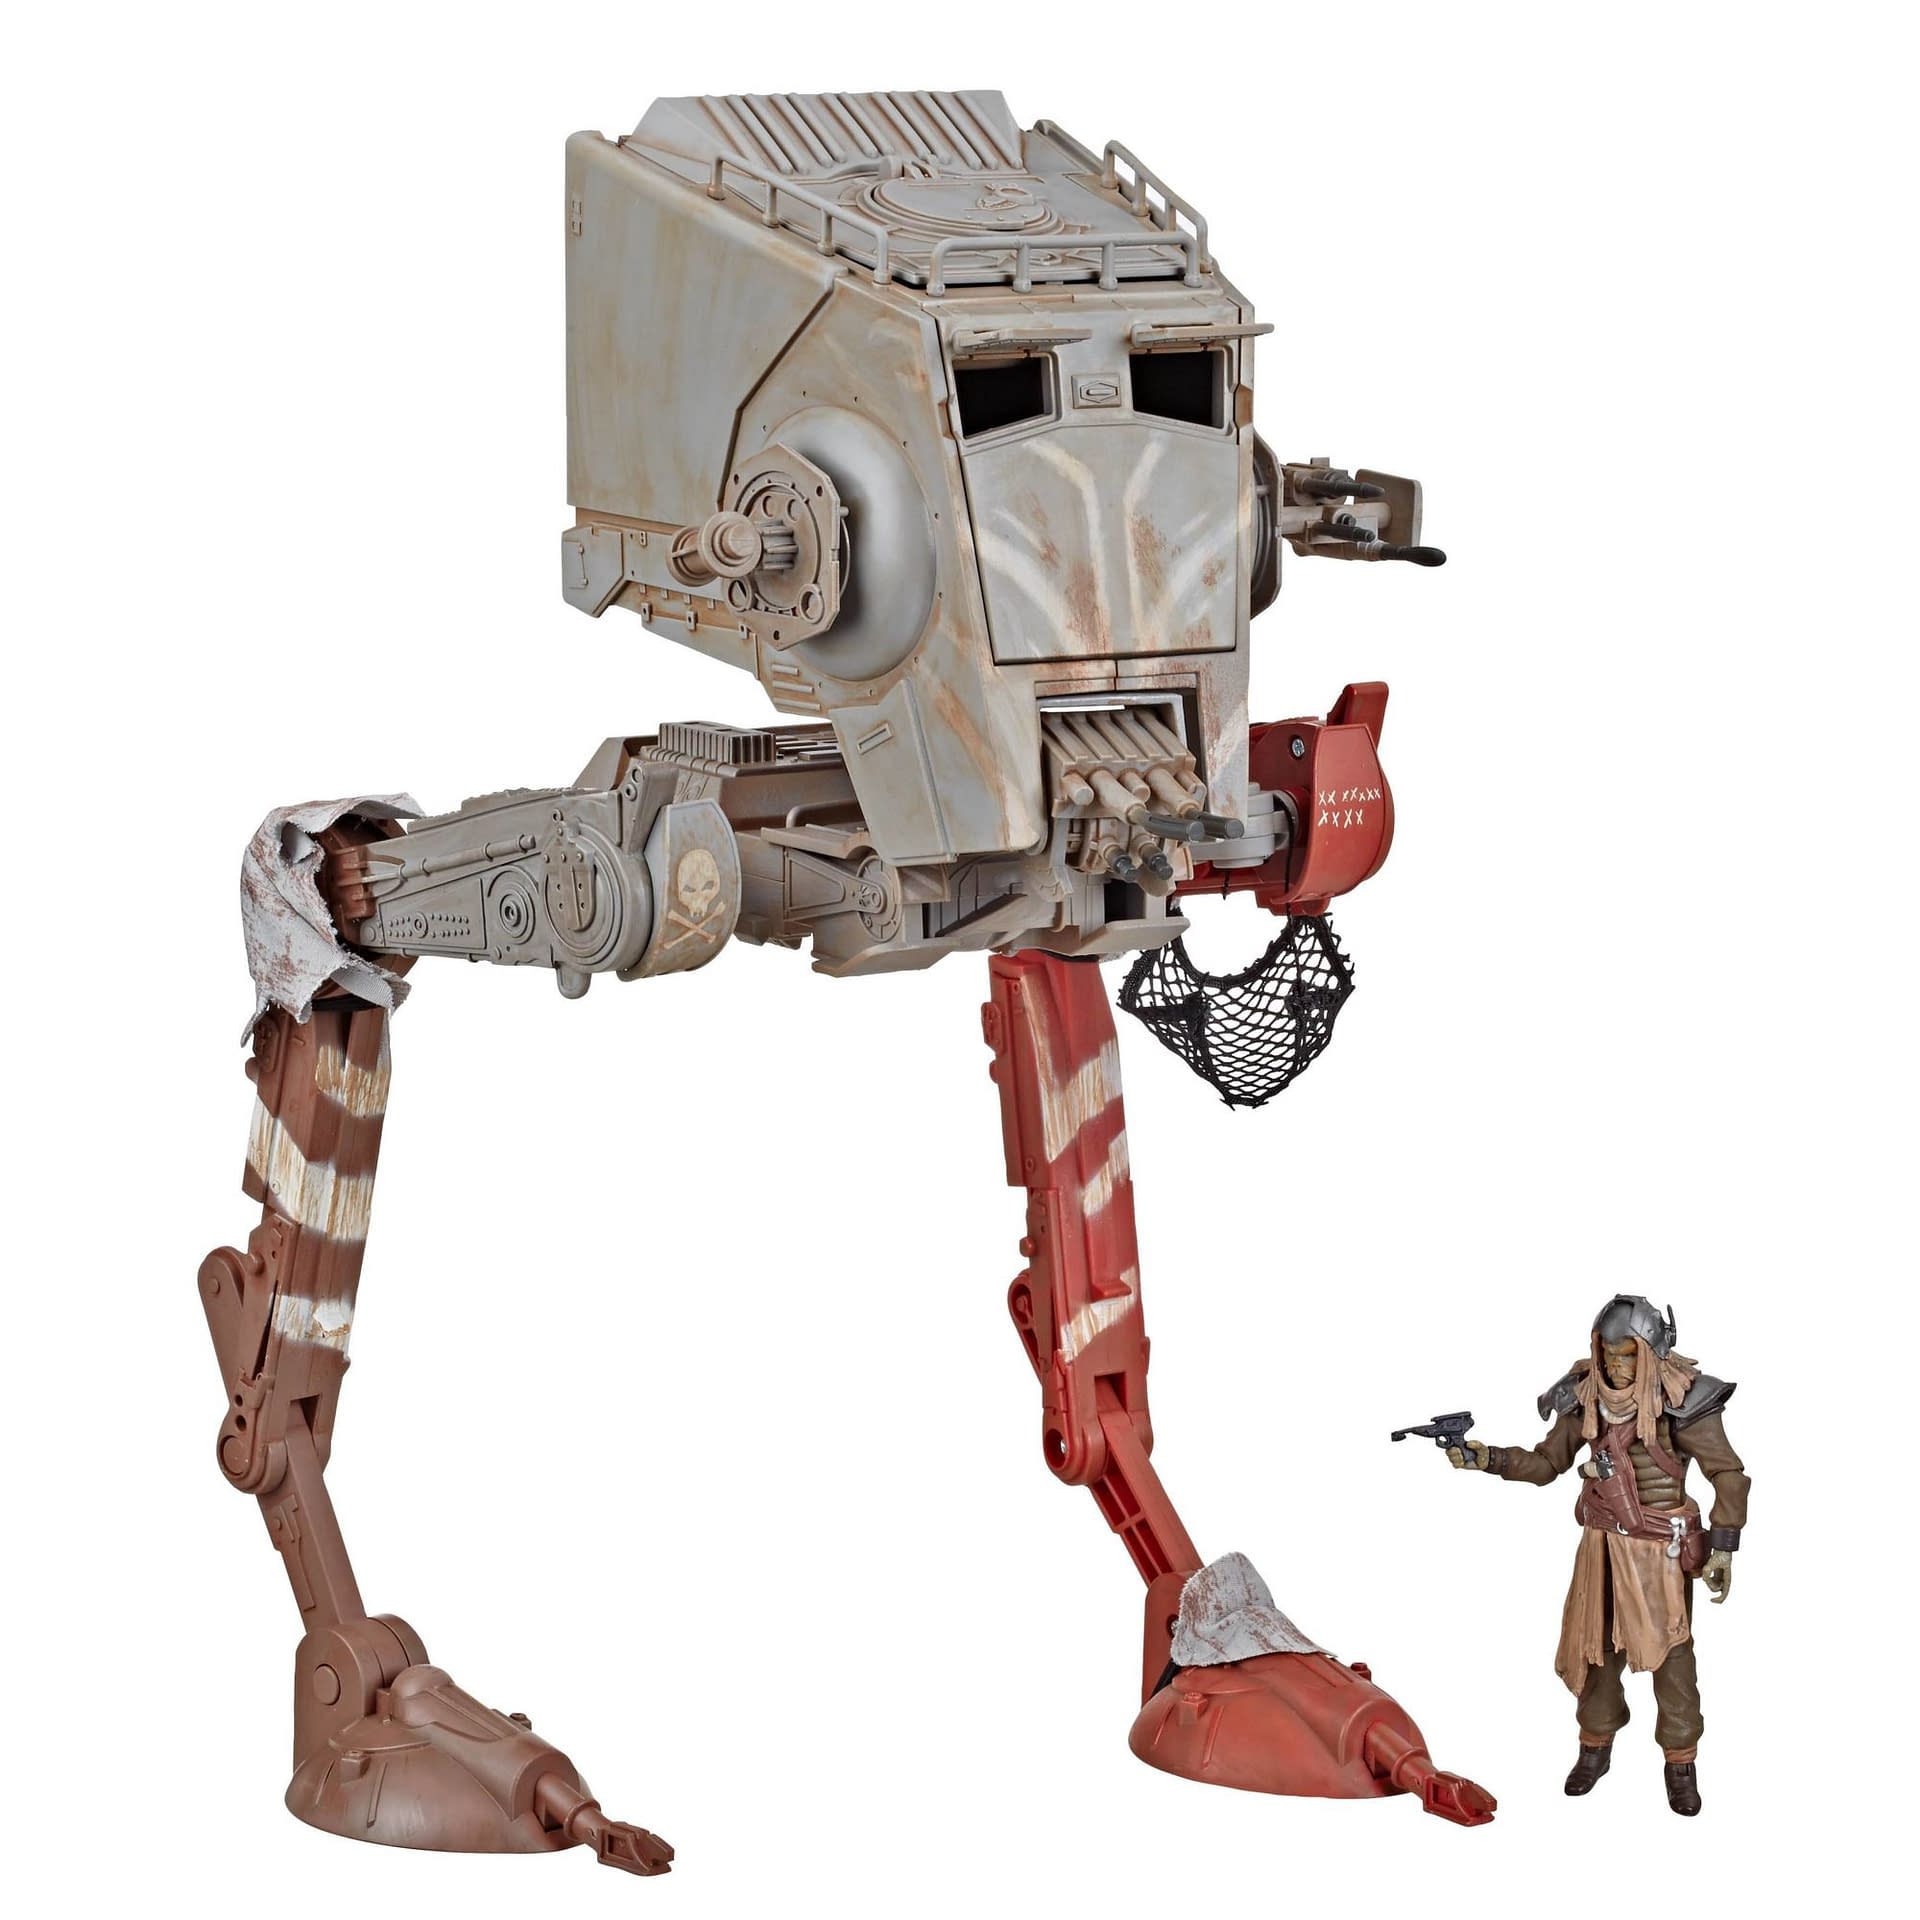 New Star Wars Vehicles Are Getting the Vintage Treatment